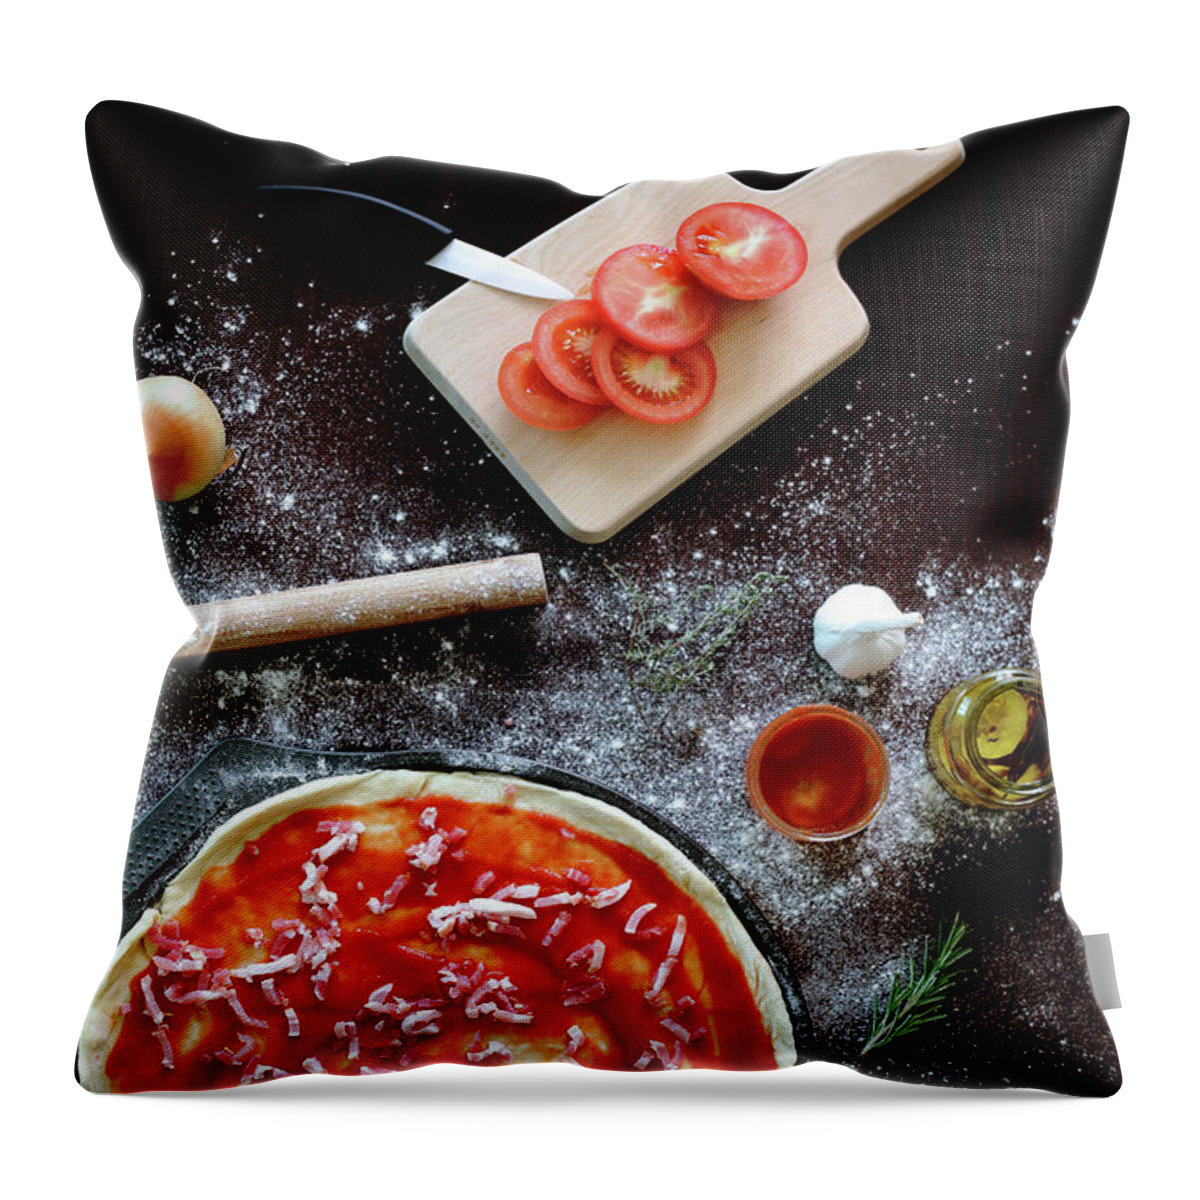 Cooking Utensil Throw Pillow featuring the photograph Ingredients For Pizza by Virginie Blanquart